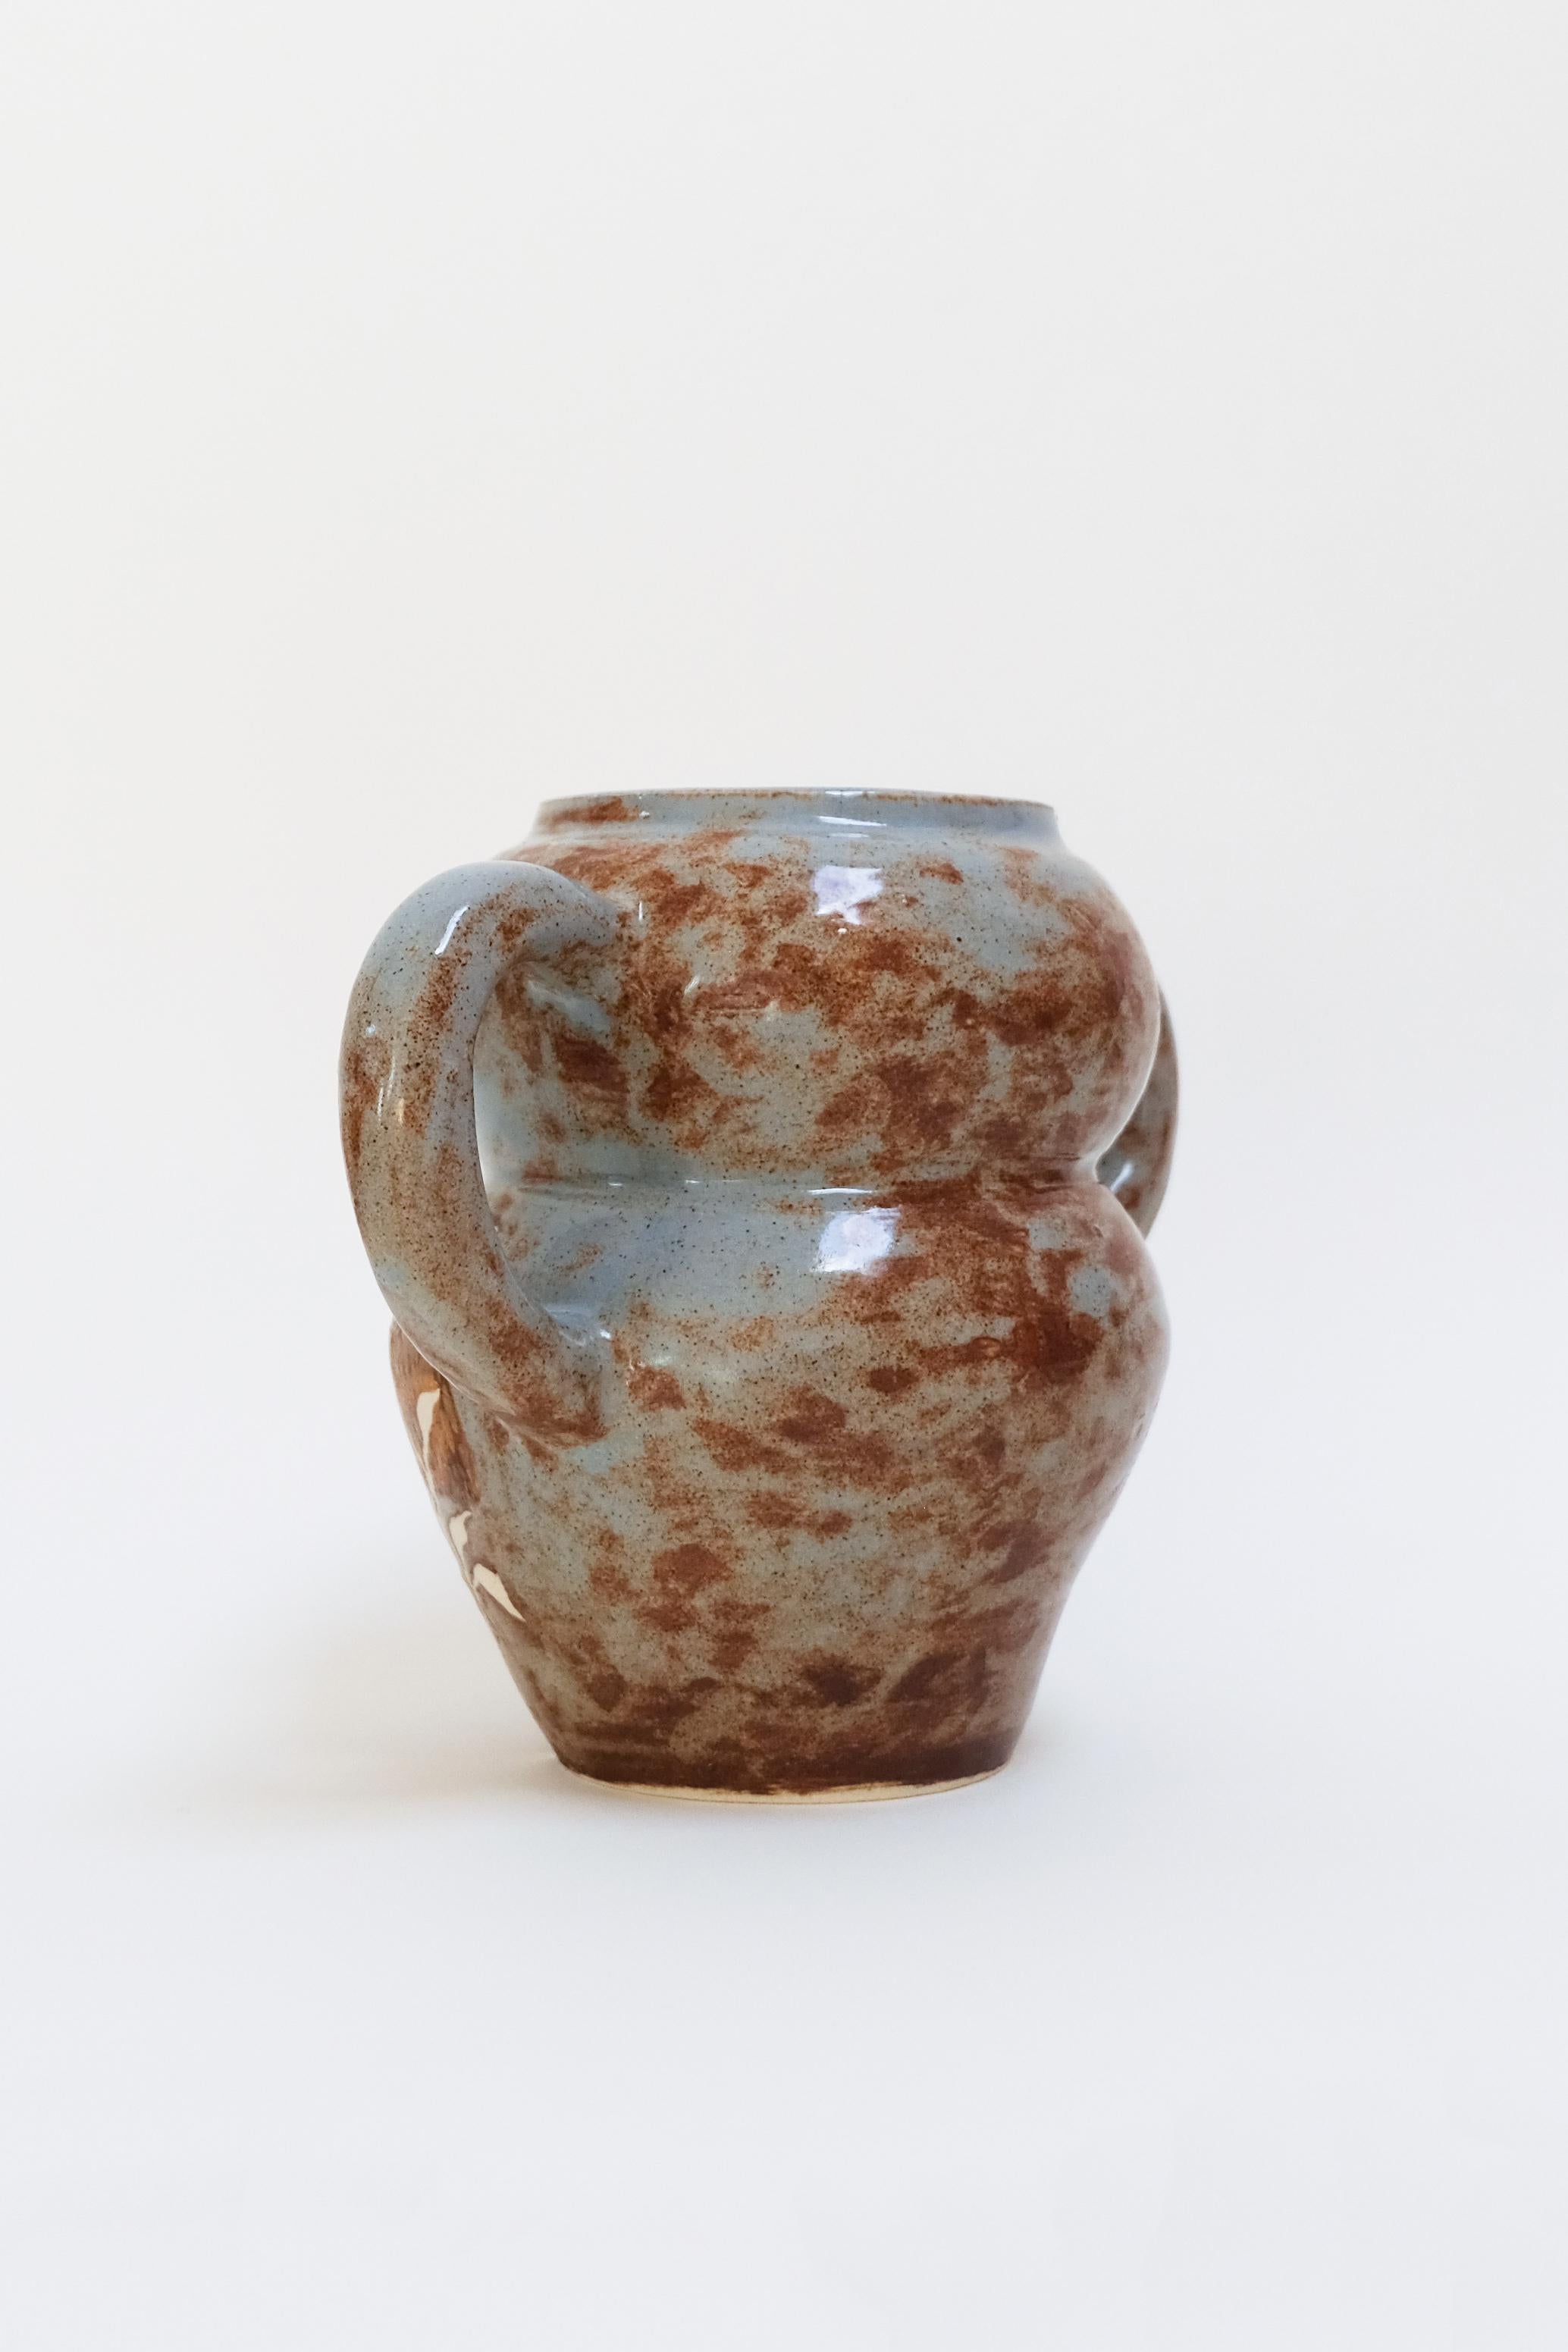 This warm contemporary handled ceramic vase features a unique bird design and is an original artwork by Canadian artist Misbah Ahmed. This piece from her collection of Mur vessels explores organic feminine forms with clay. Mur - meaning curve - uses